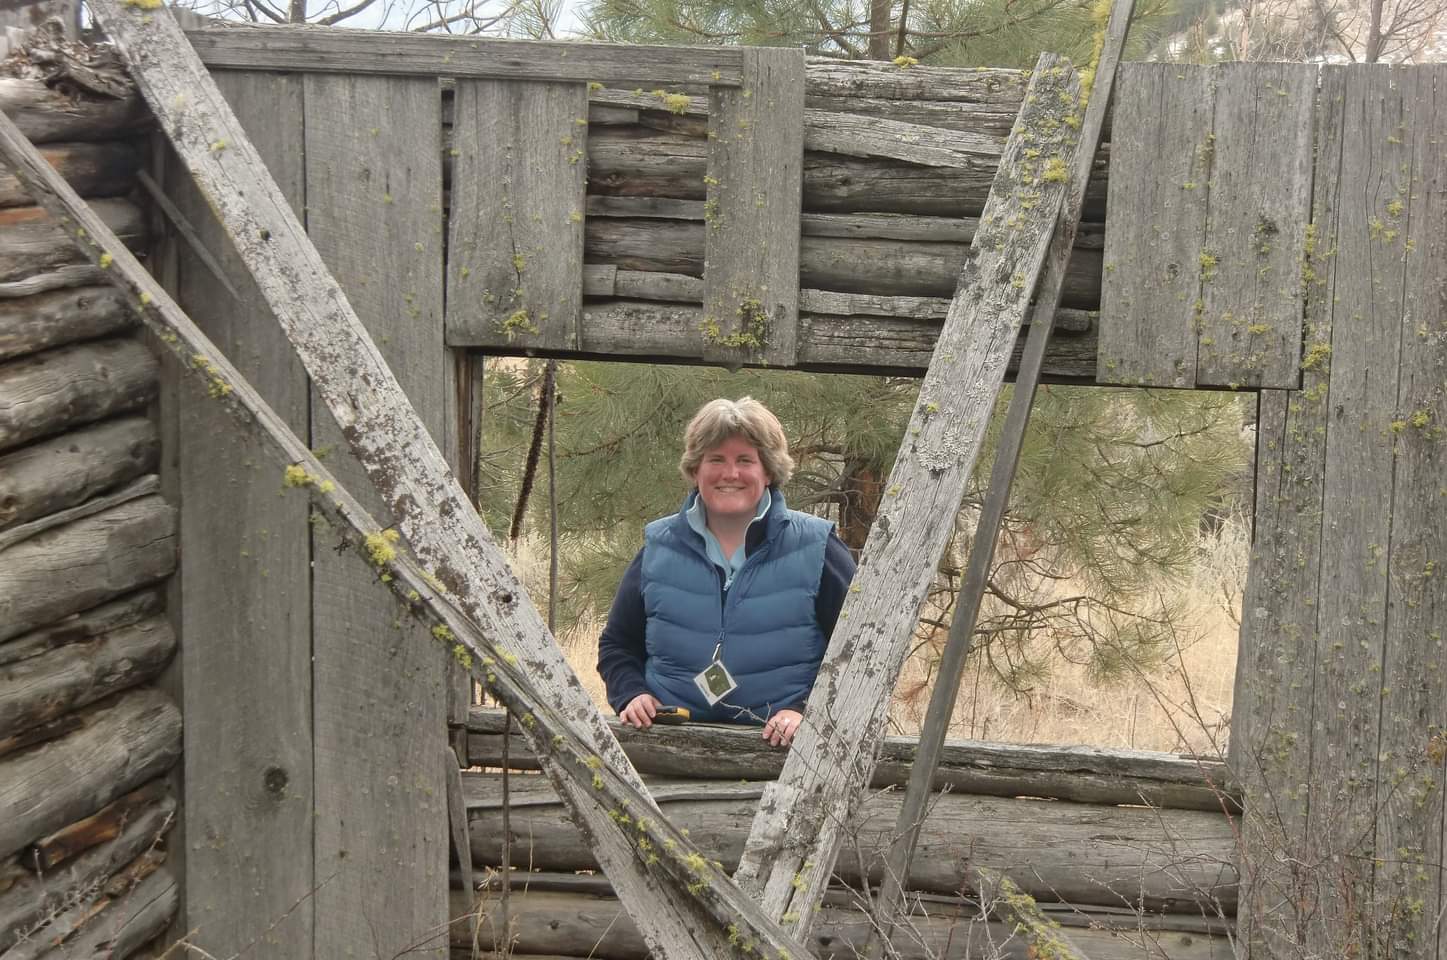 A woman standing in the forest poses for a picture while looking through an opening in a wooden wall.